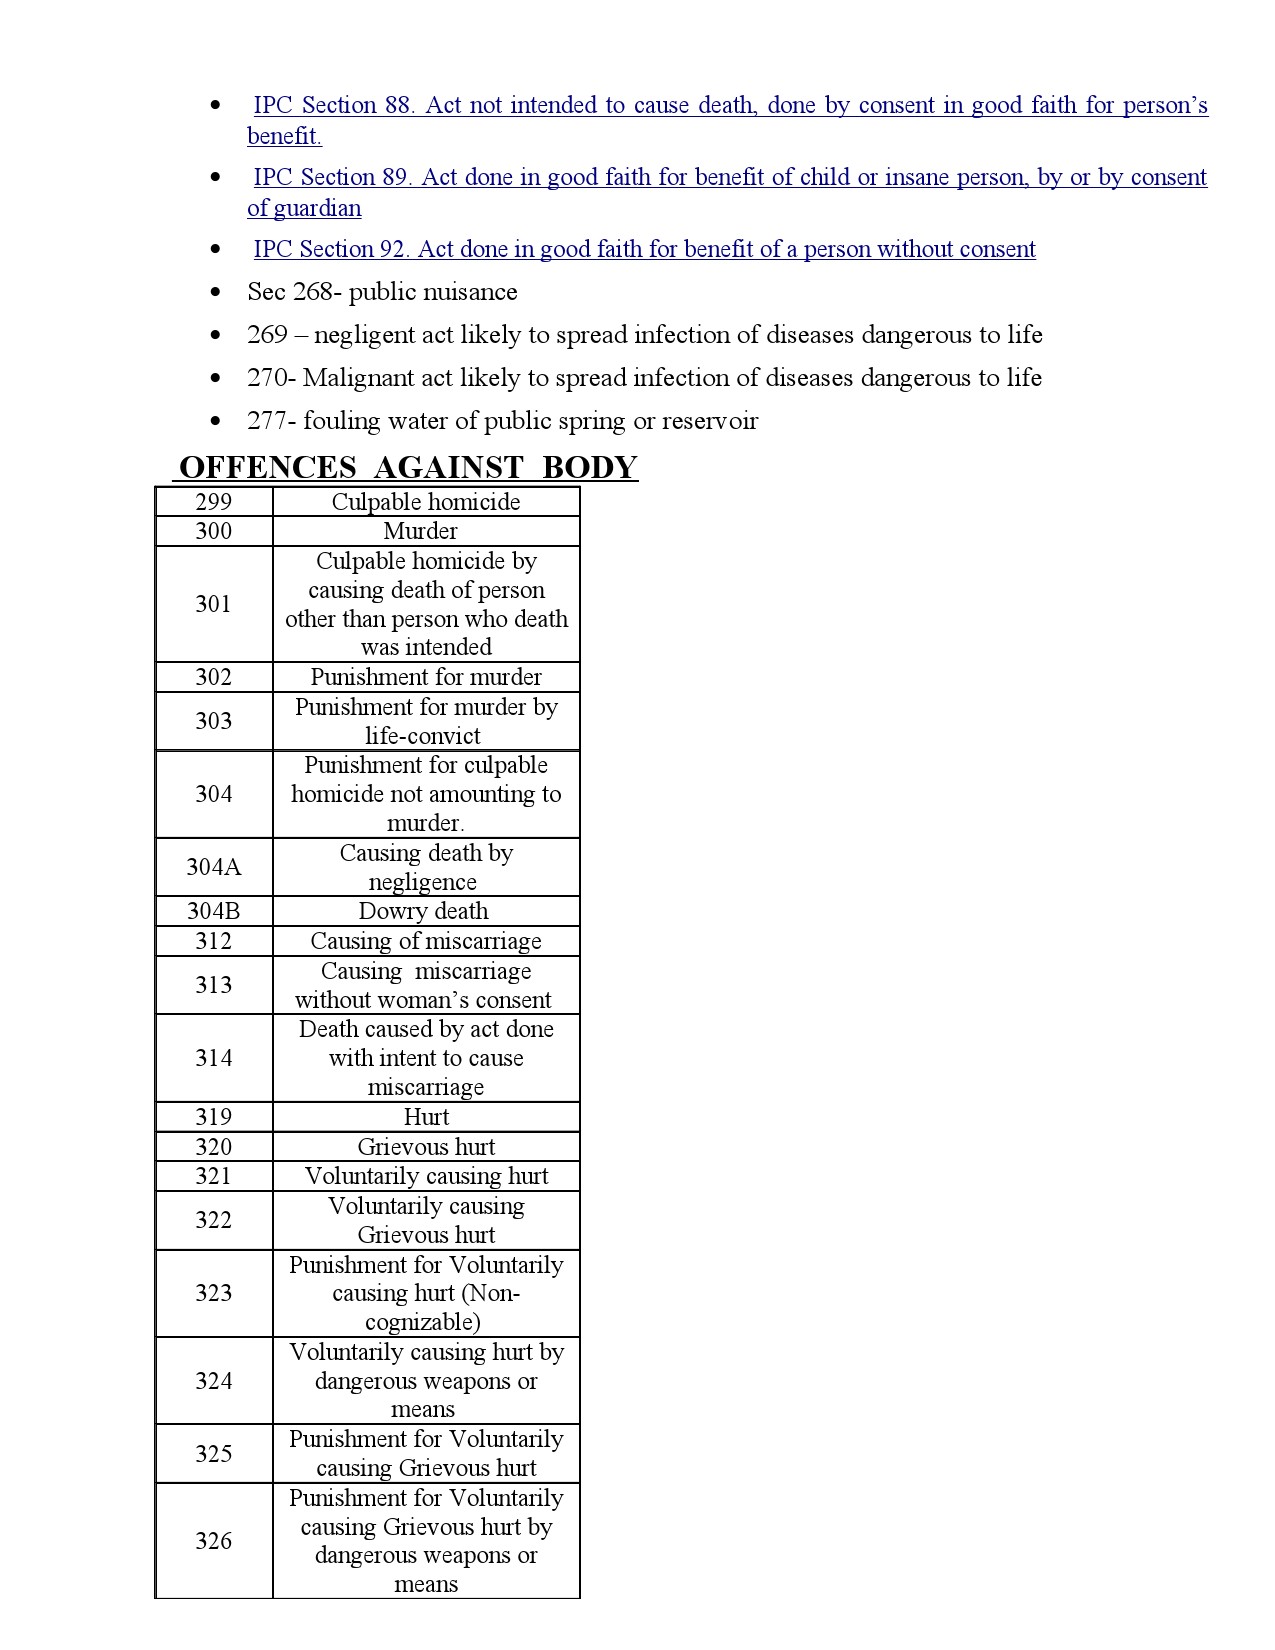 Syllabus For 2023 OMR Examination Of Civil Police Officer - Notification Image 11